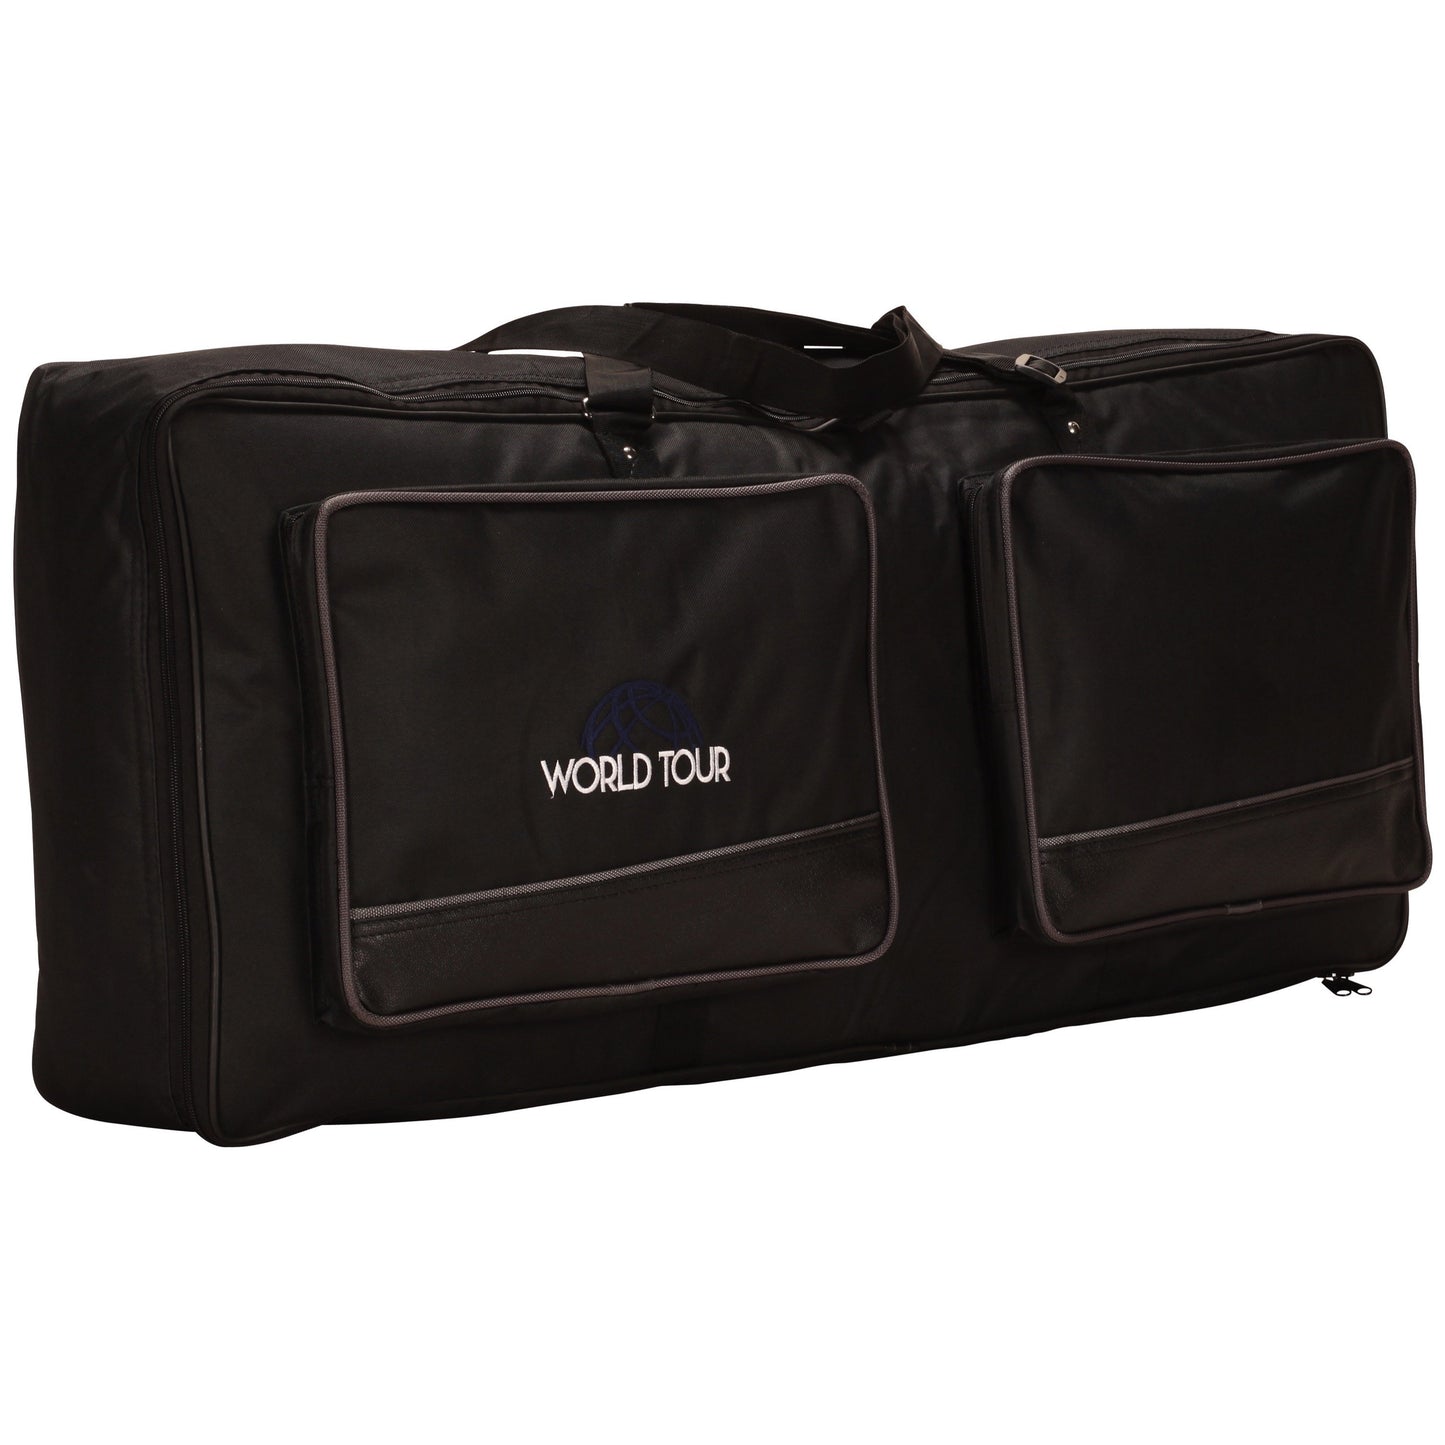 World Tour Deluxe Keyboard Bag for Casio CTK700, 38.00 x 15.00 x 6.00 Inch